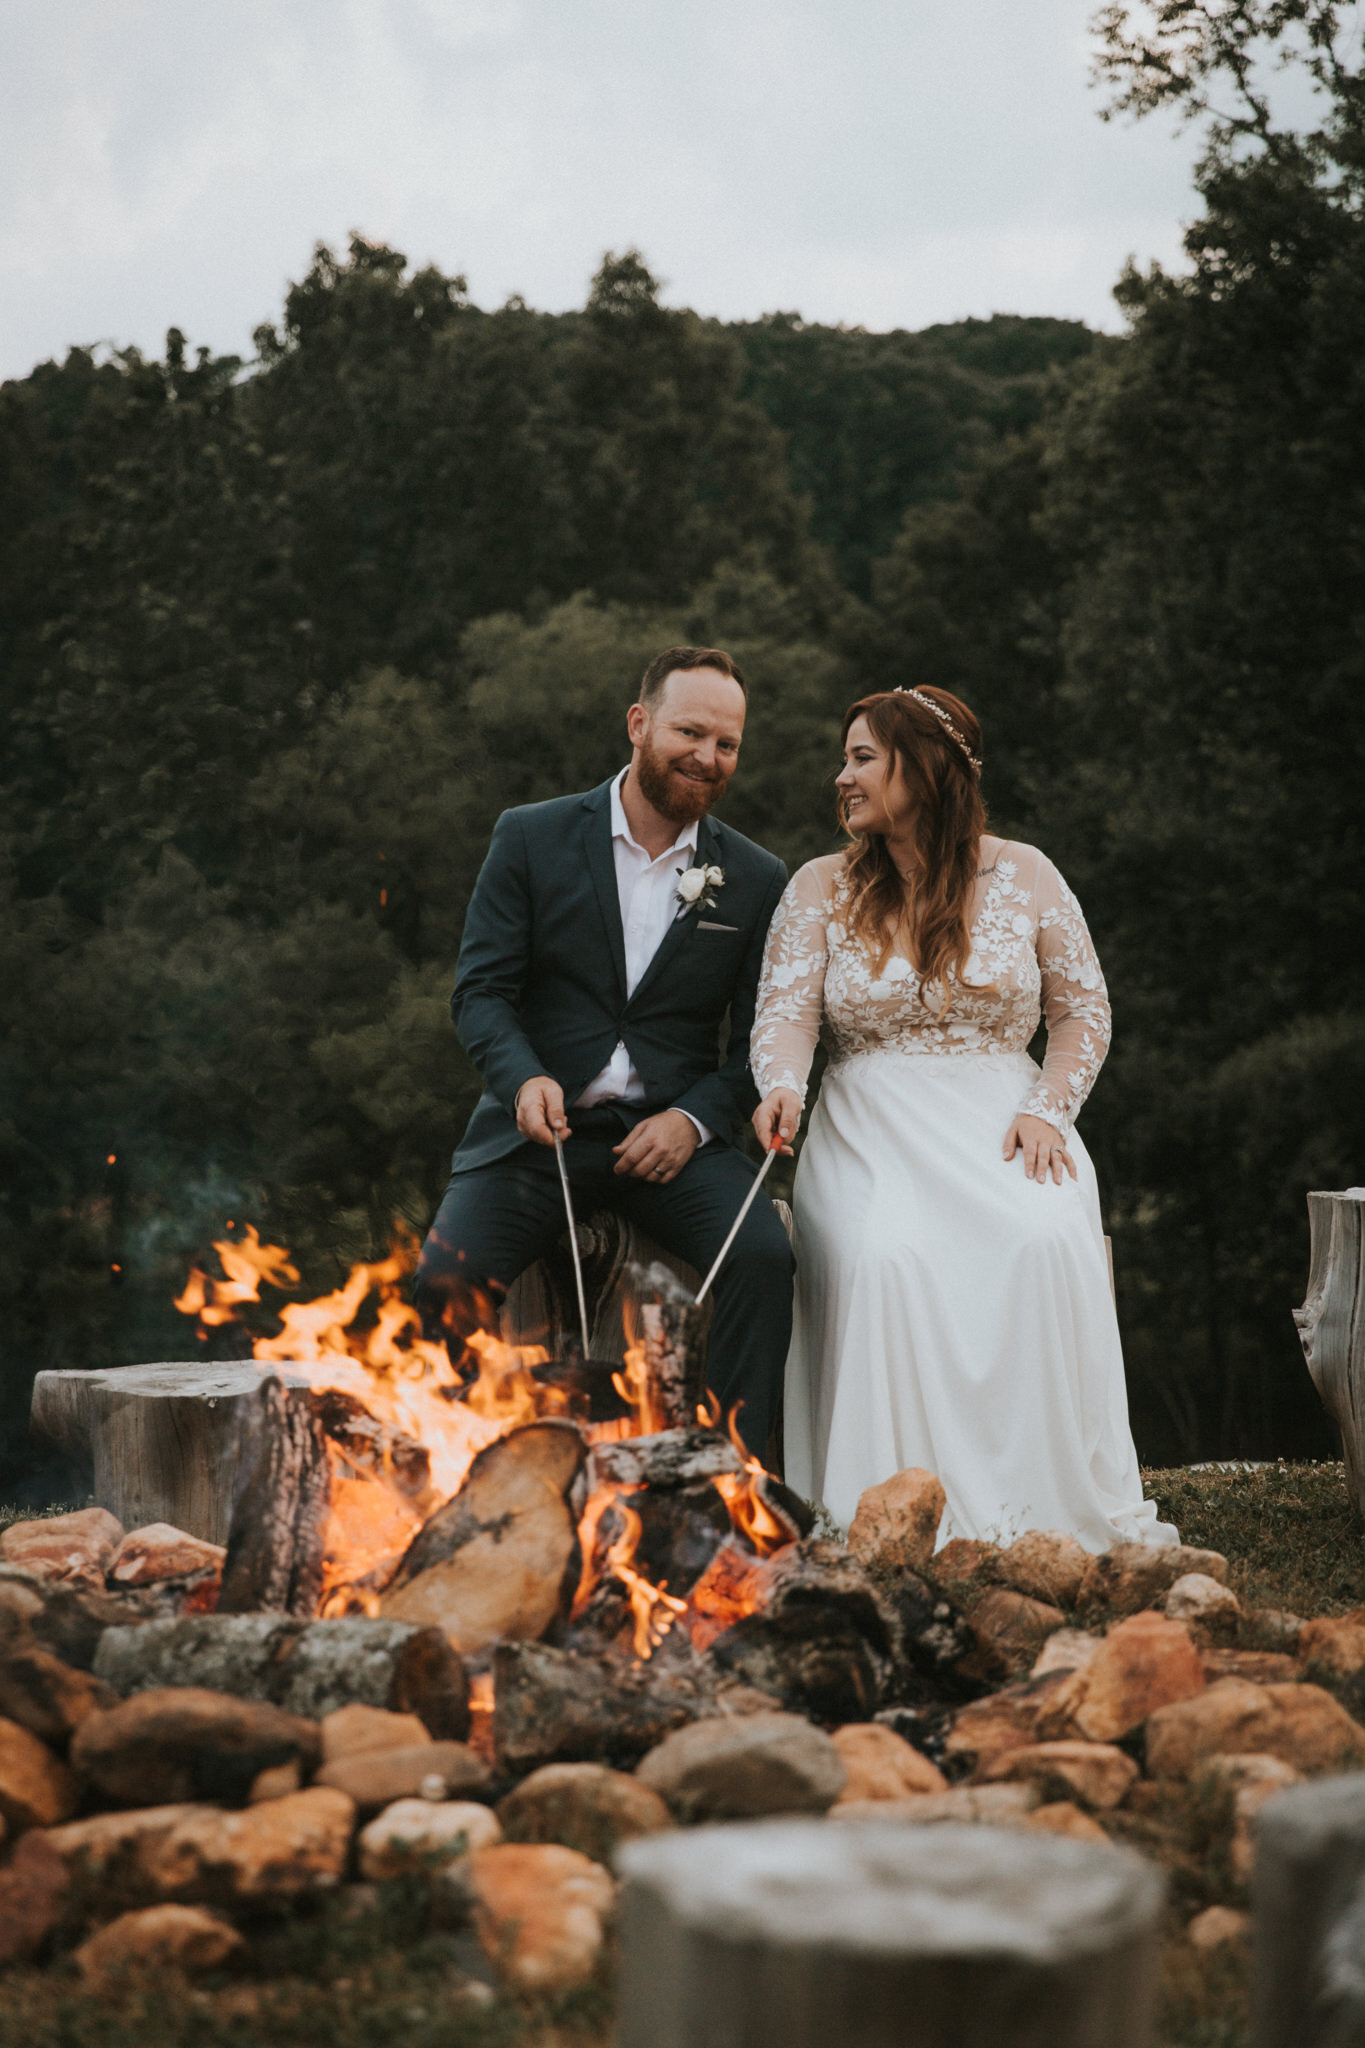 A couple roasts marshmallows by the campfire on their intimate wedding day